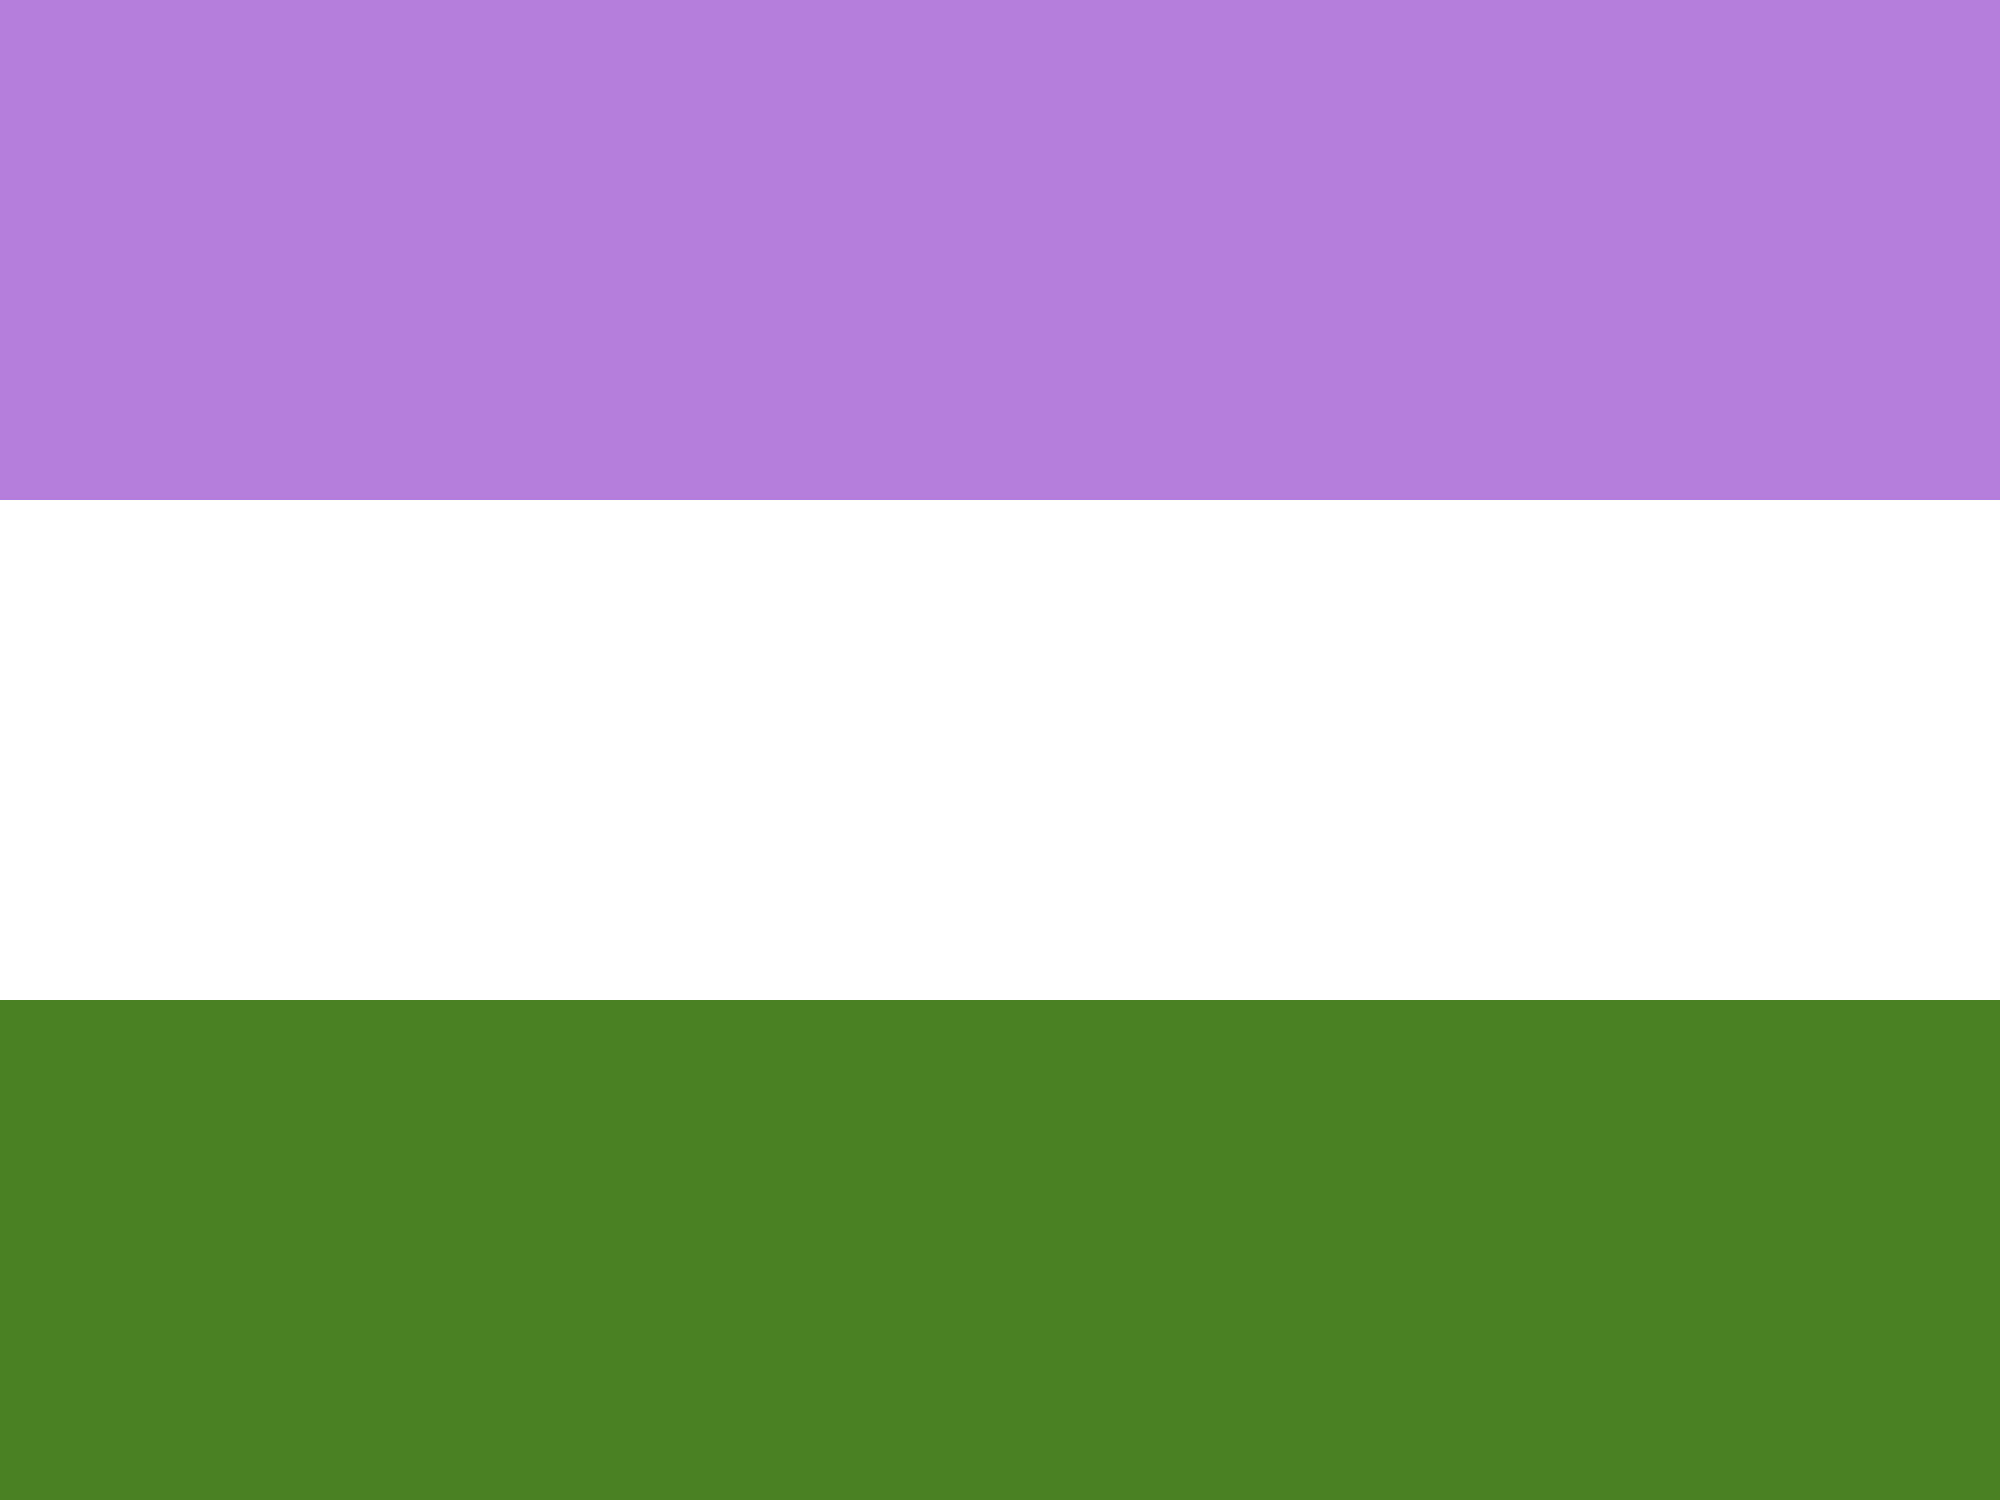 The genderqueer flag, which includes purple, white, and green.